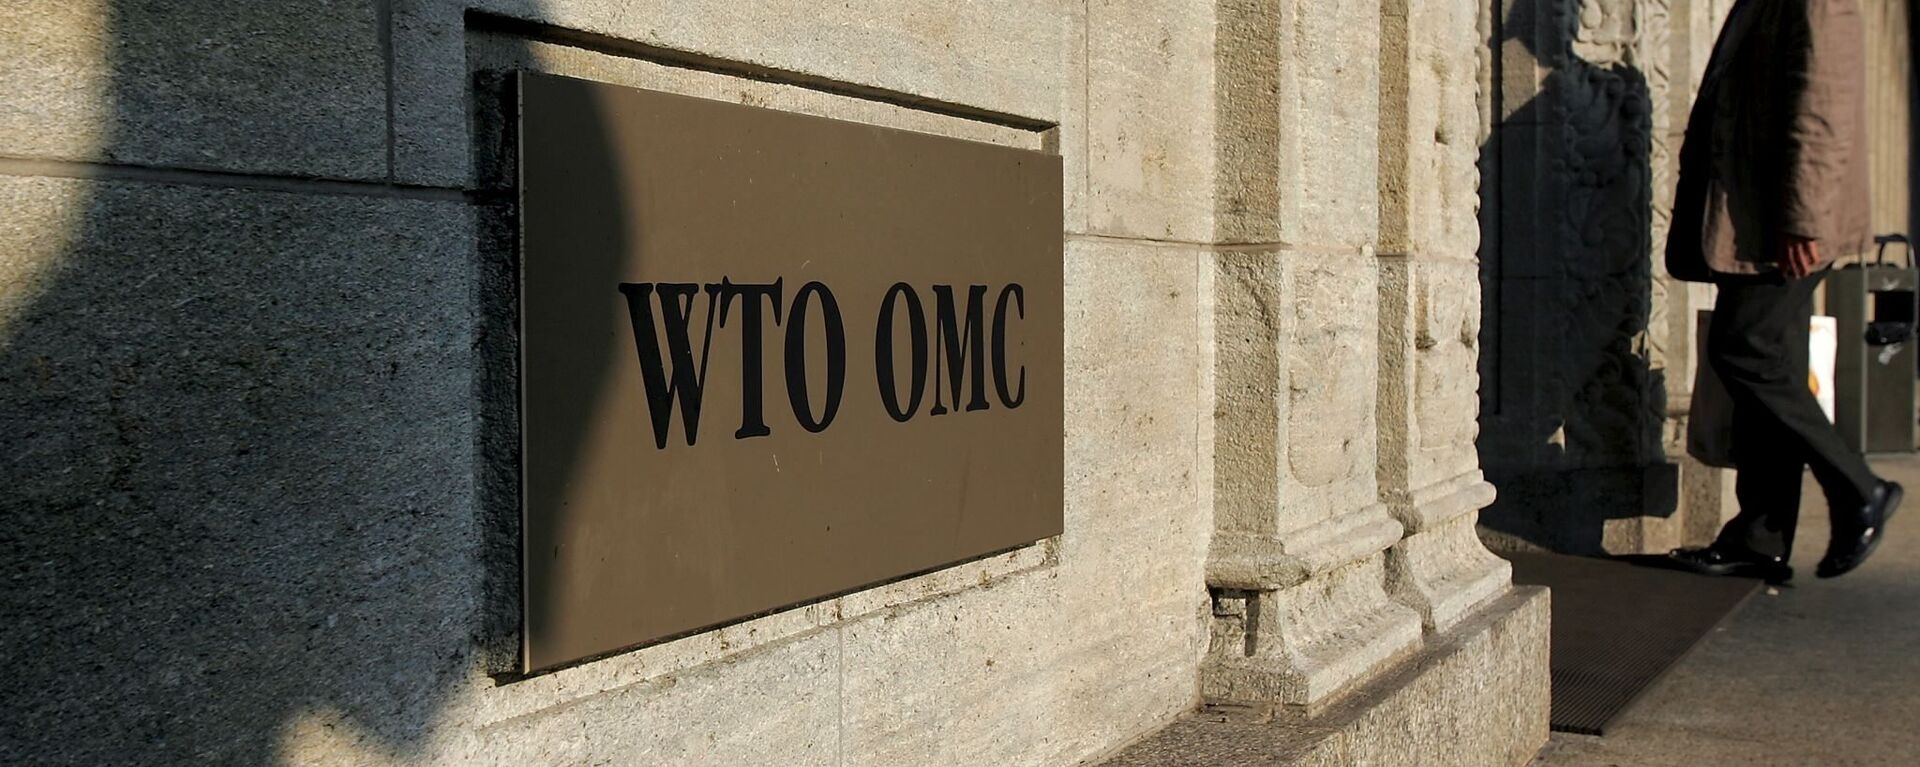 The shadow of a sculpture is reflected on the World Trade Organisation, WTO sign near the entrance of the headquarters, in Geneva (File) - Sputnik International, 1920, 24.12.2021